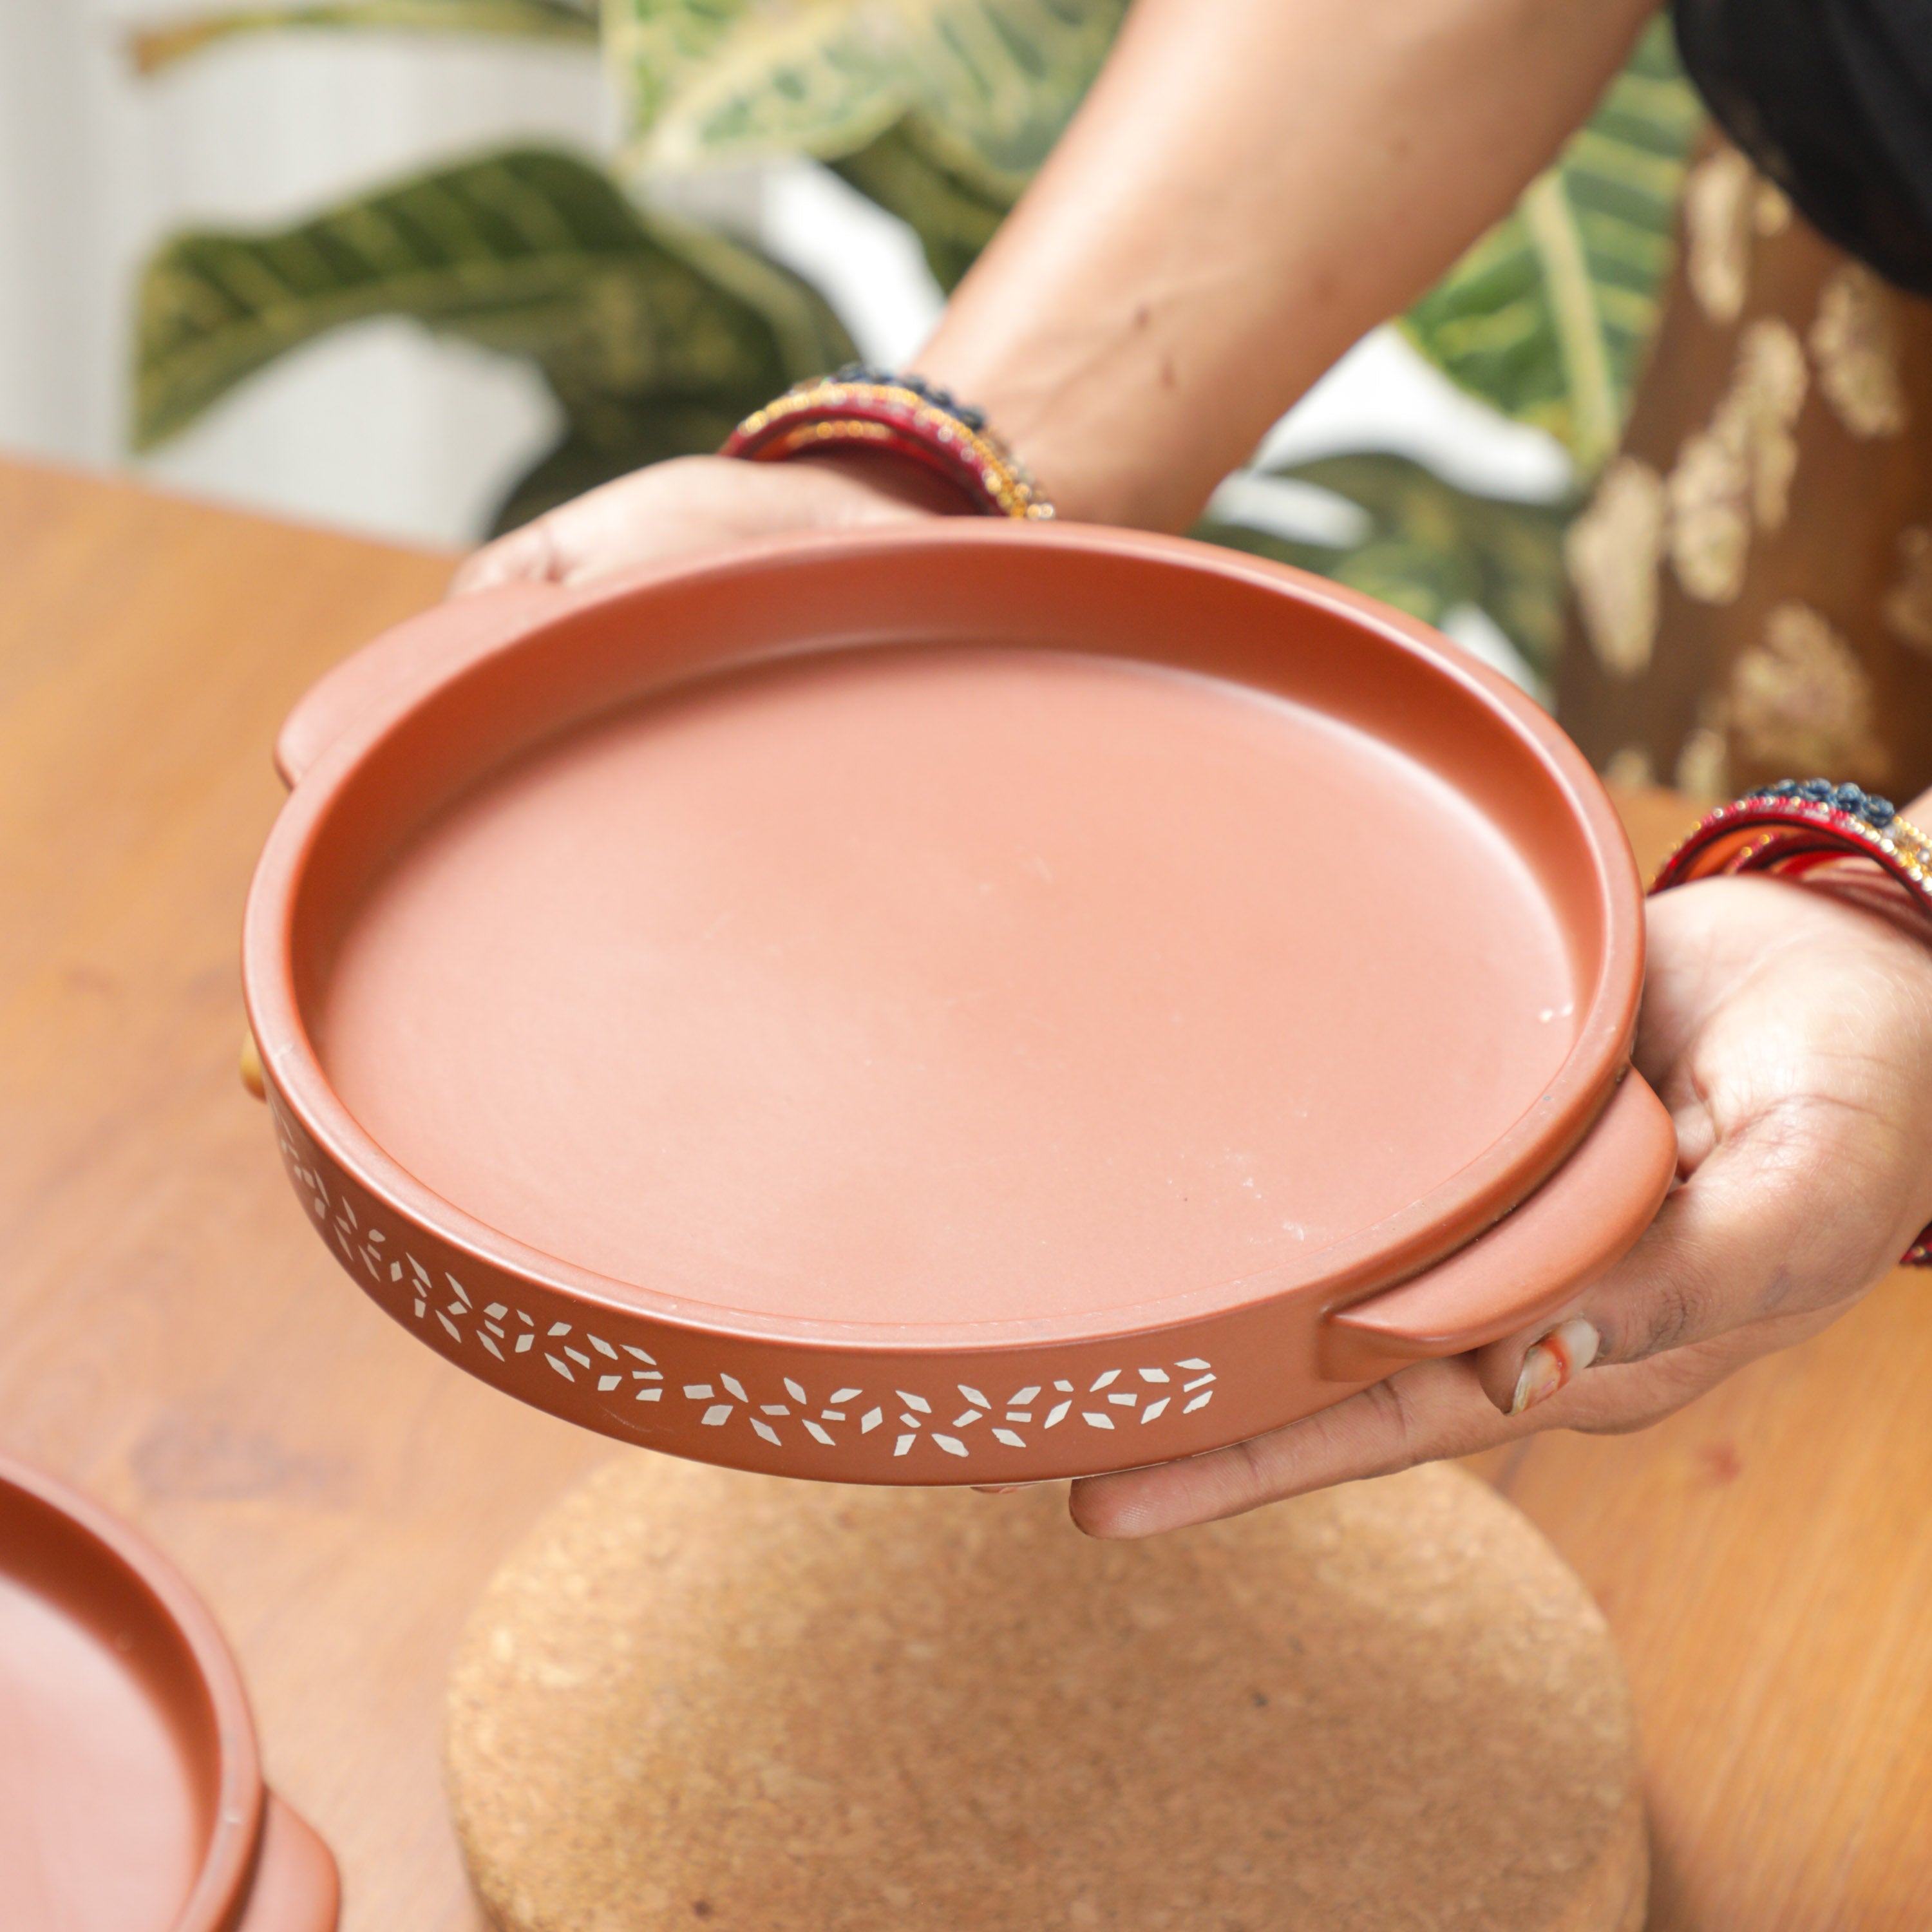 Indian Tea Cups from Desifavors